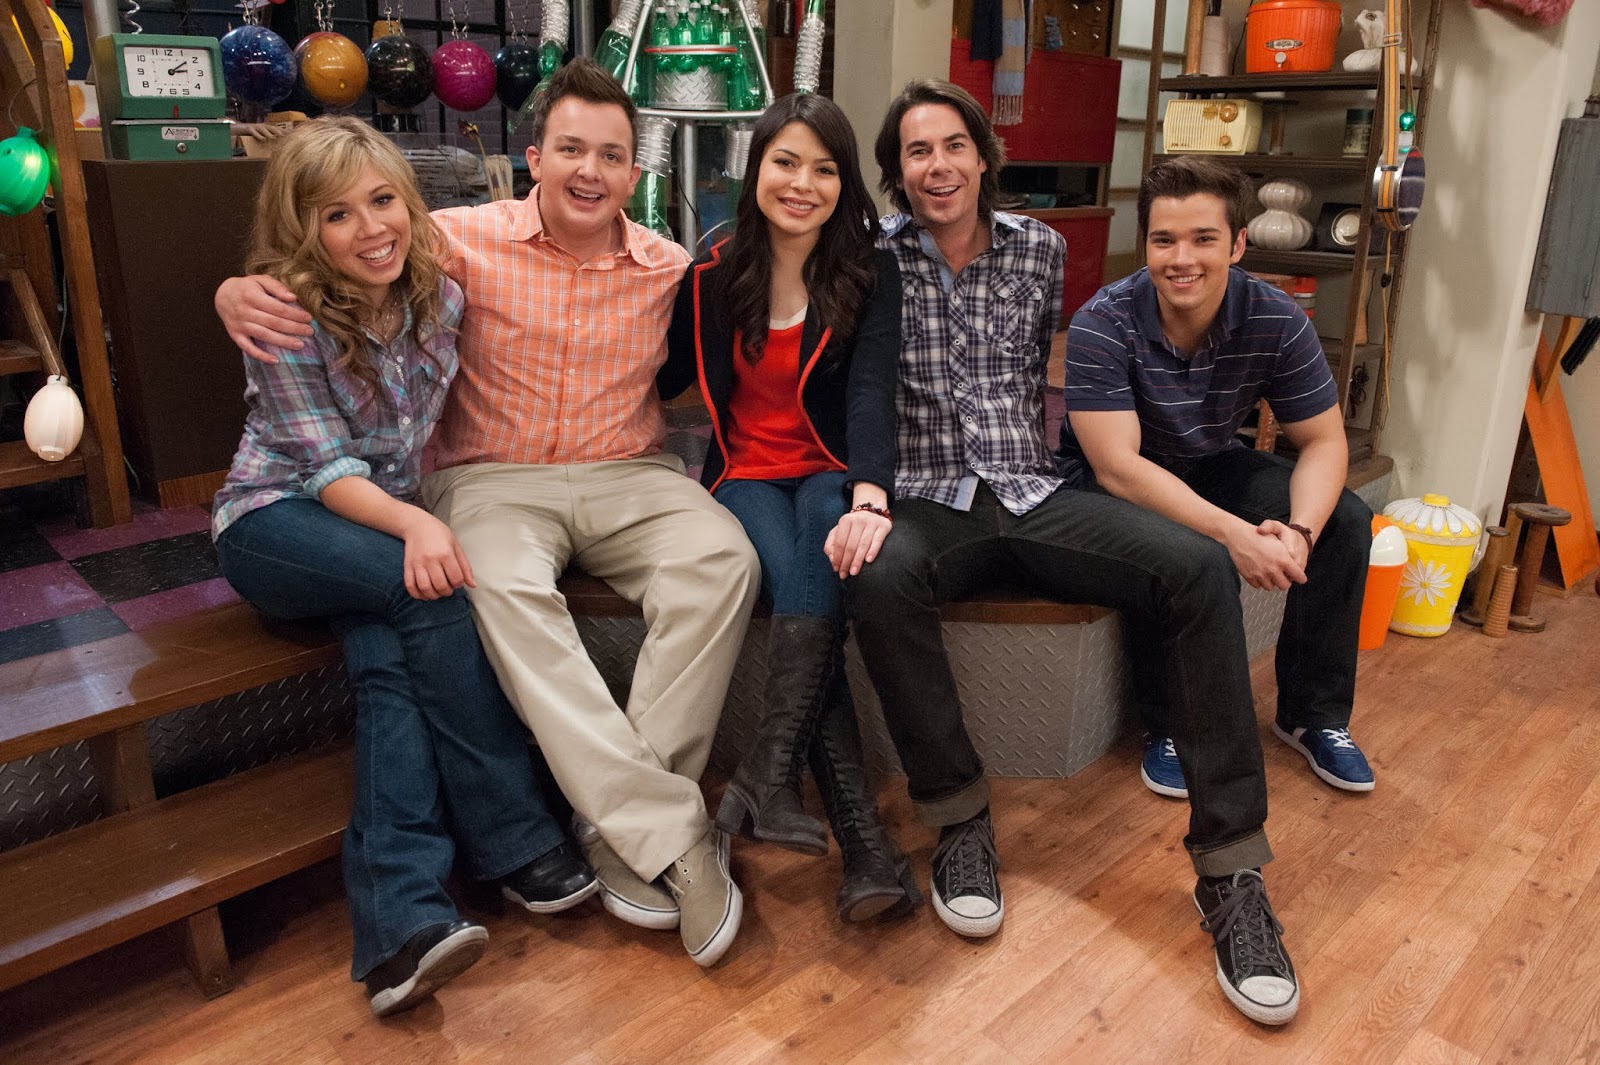 NickALive!: Netflix to Add 'iCarly' Seasons 3-5 on March 31